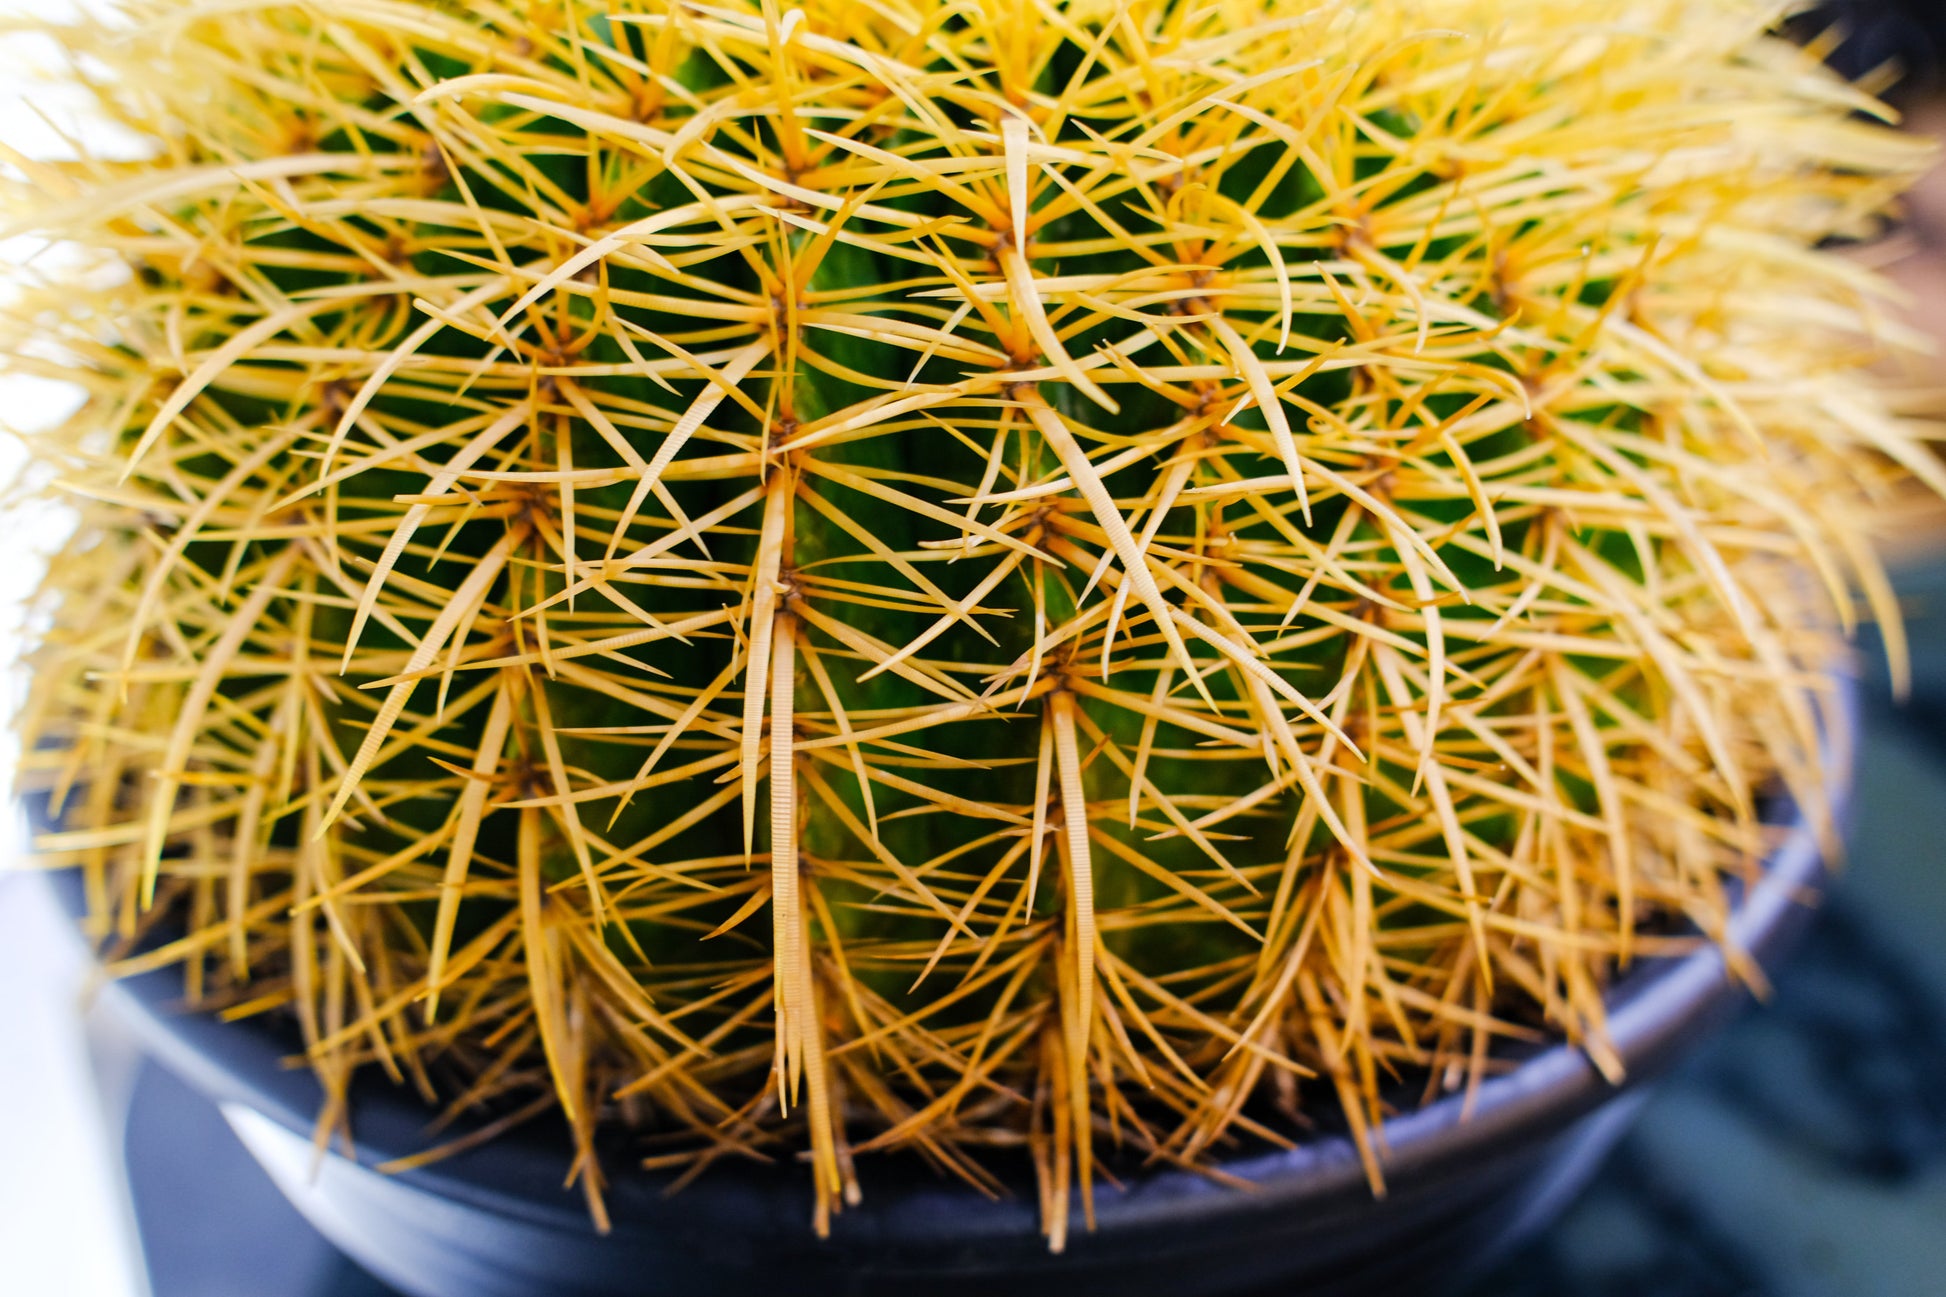 Golden Barrel Cactus (Echinocactus grusonii) in a 10 inch pot. Indoor plant for sale by Promise Supply for delivery and pickup in Toronto